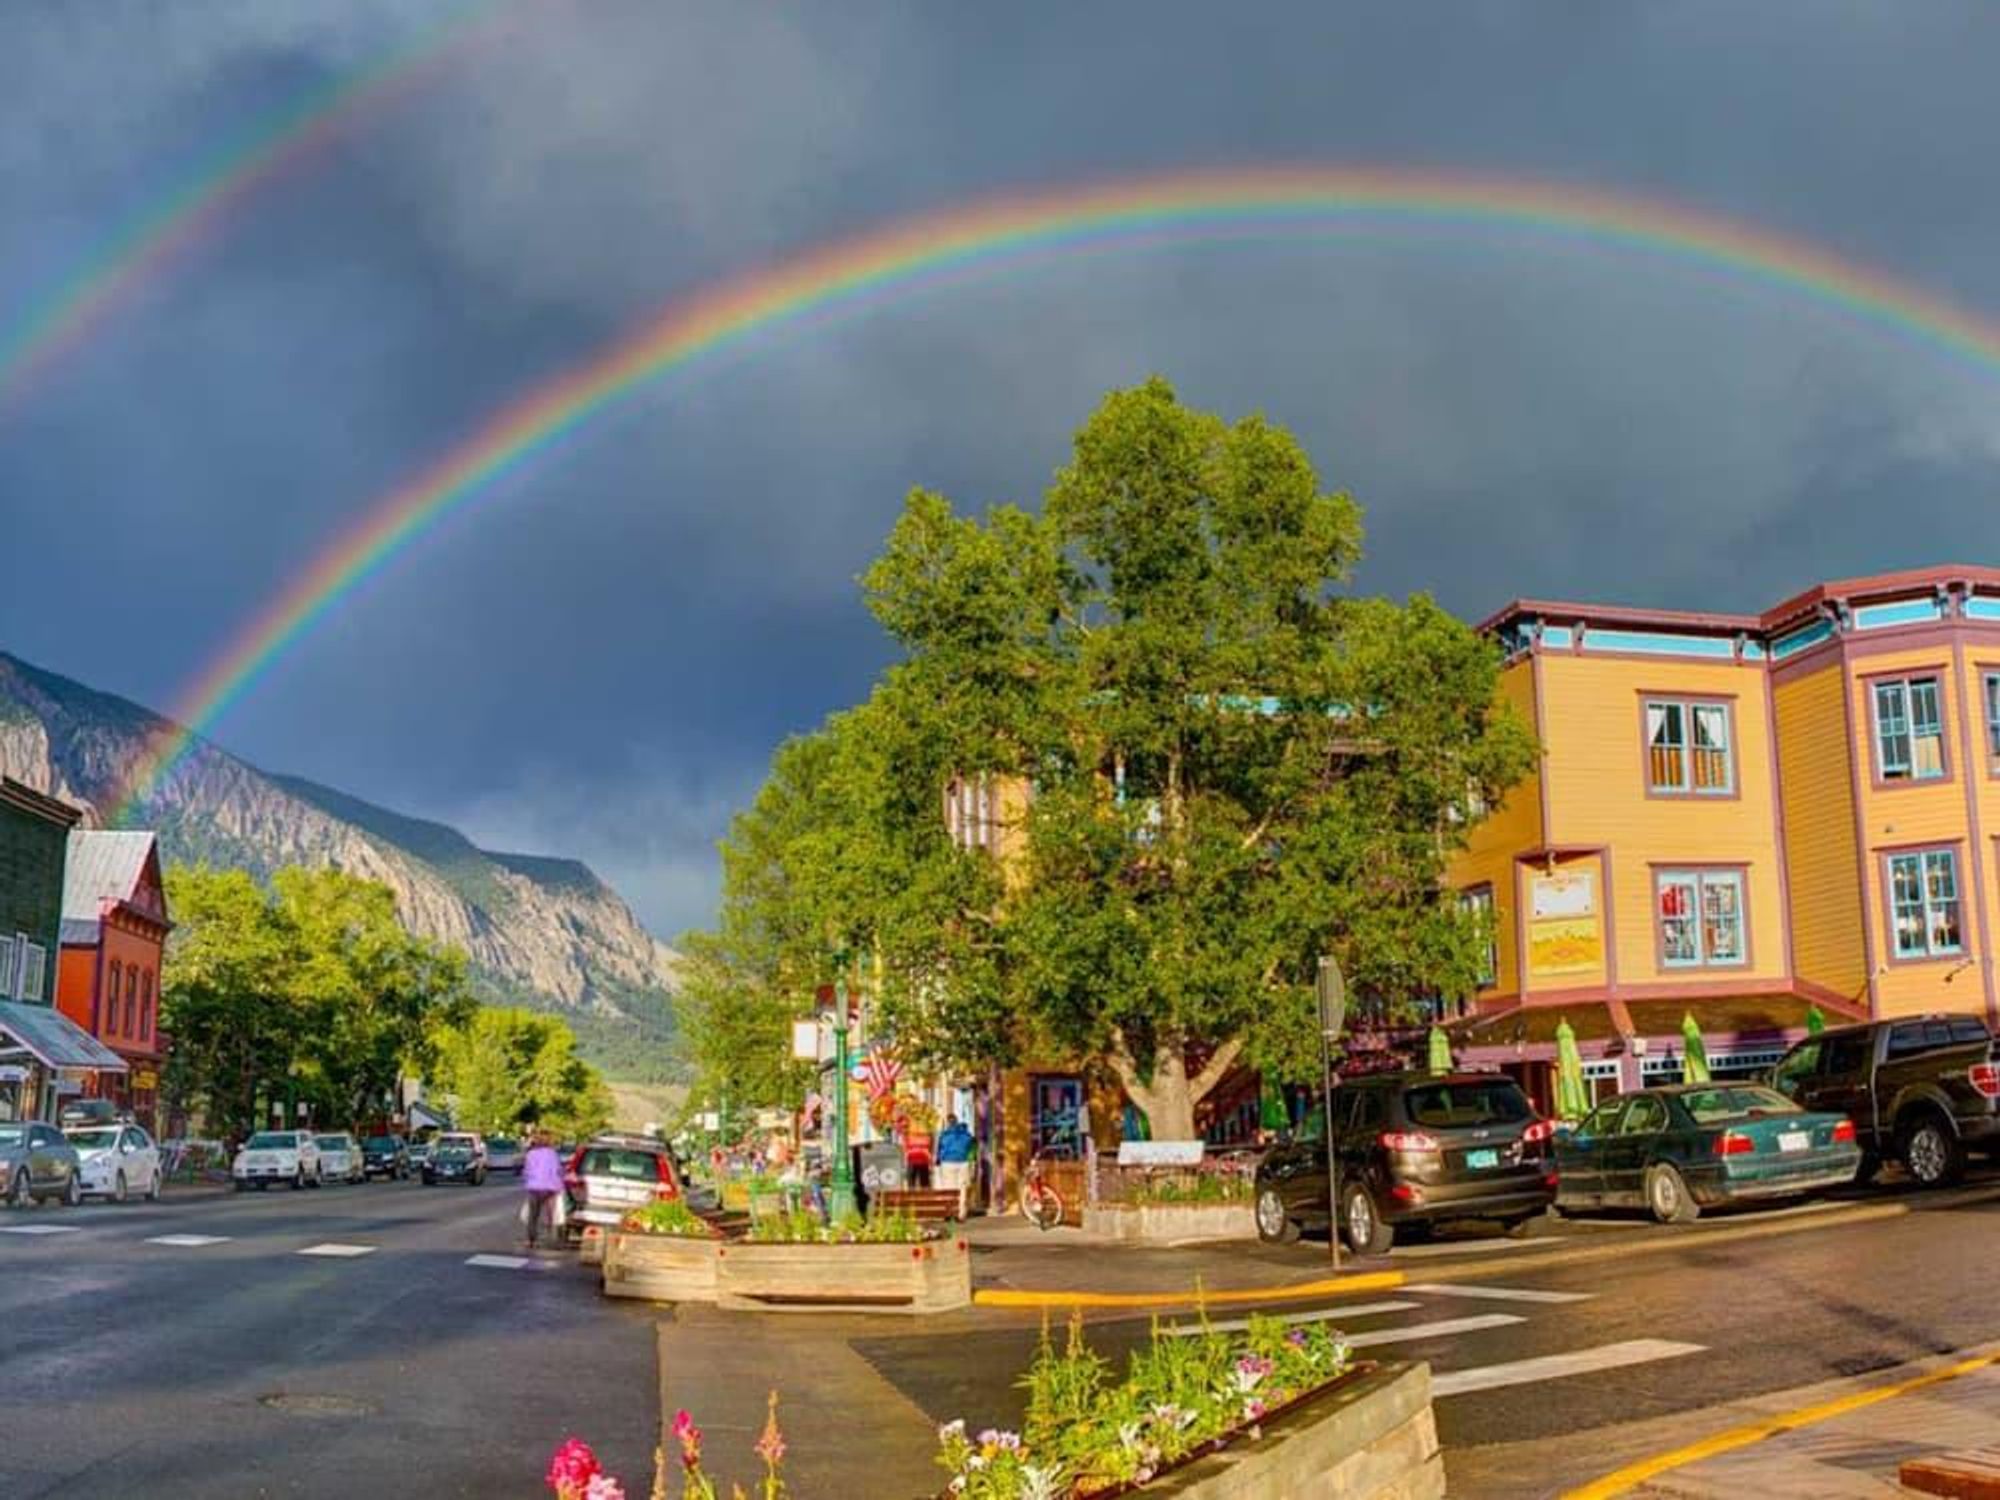 Mount Crested Butte Colorado rainbow over city